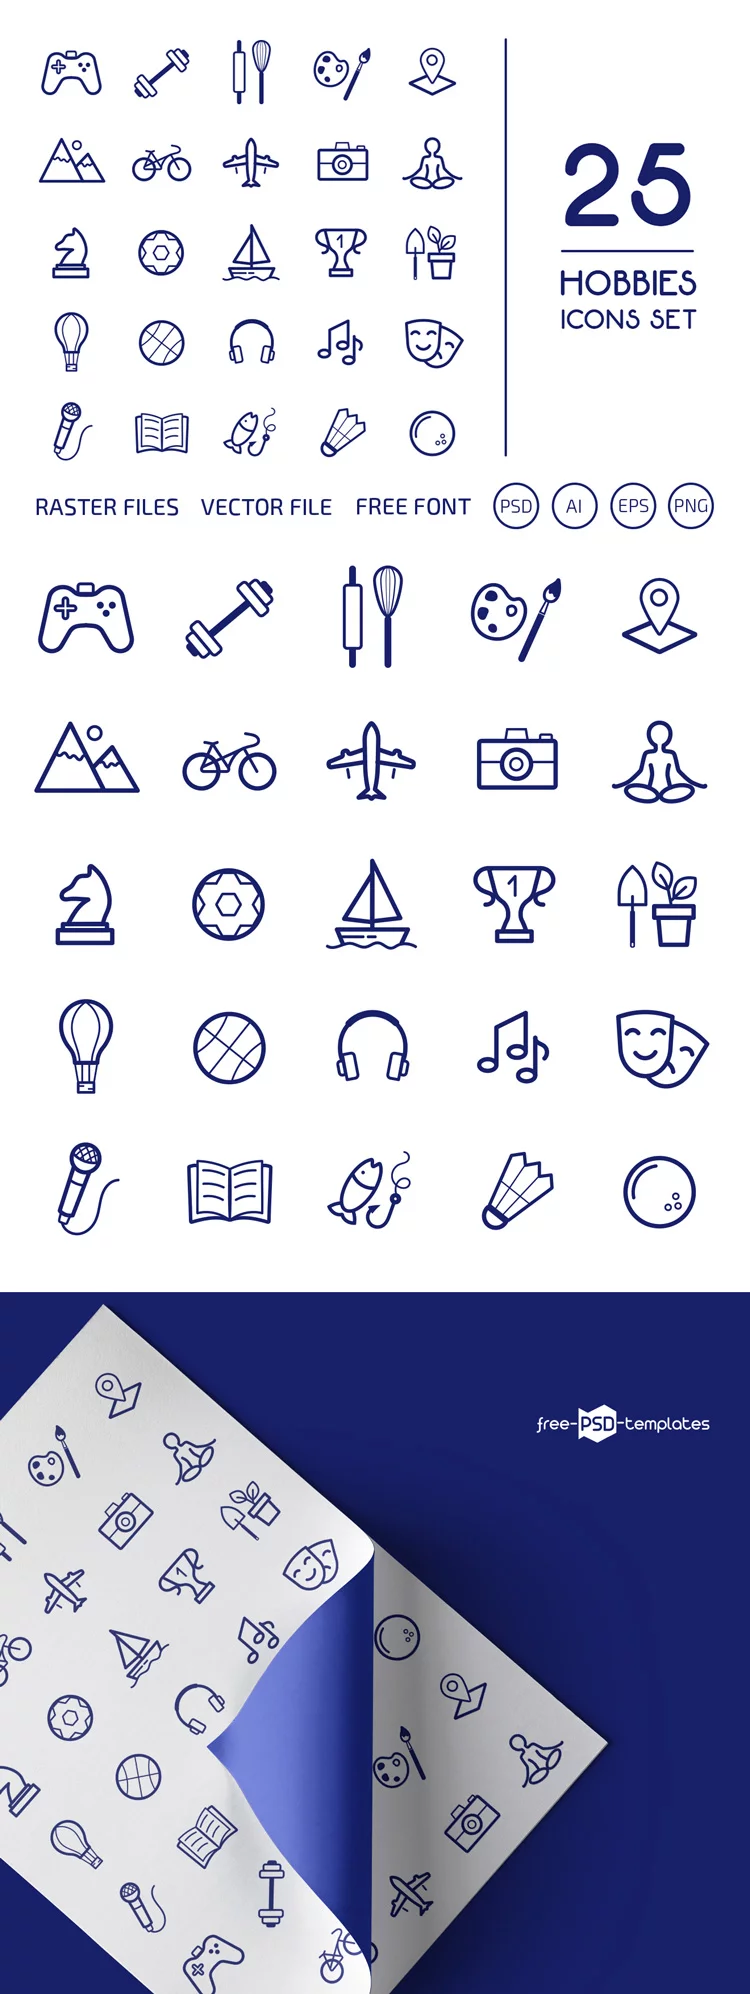 Free Vector Hobbies Icons Set Template